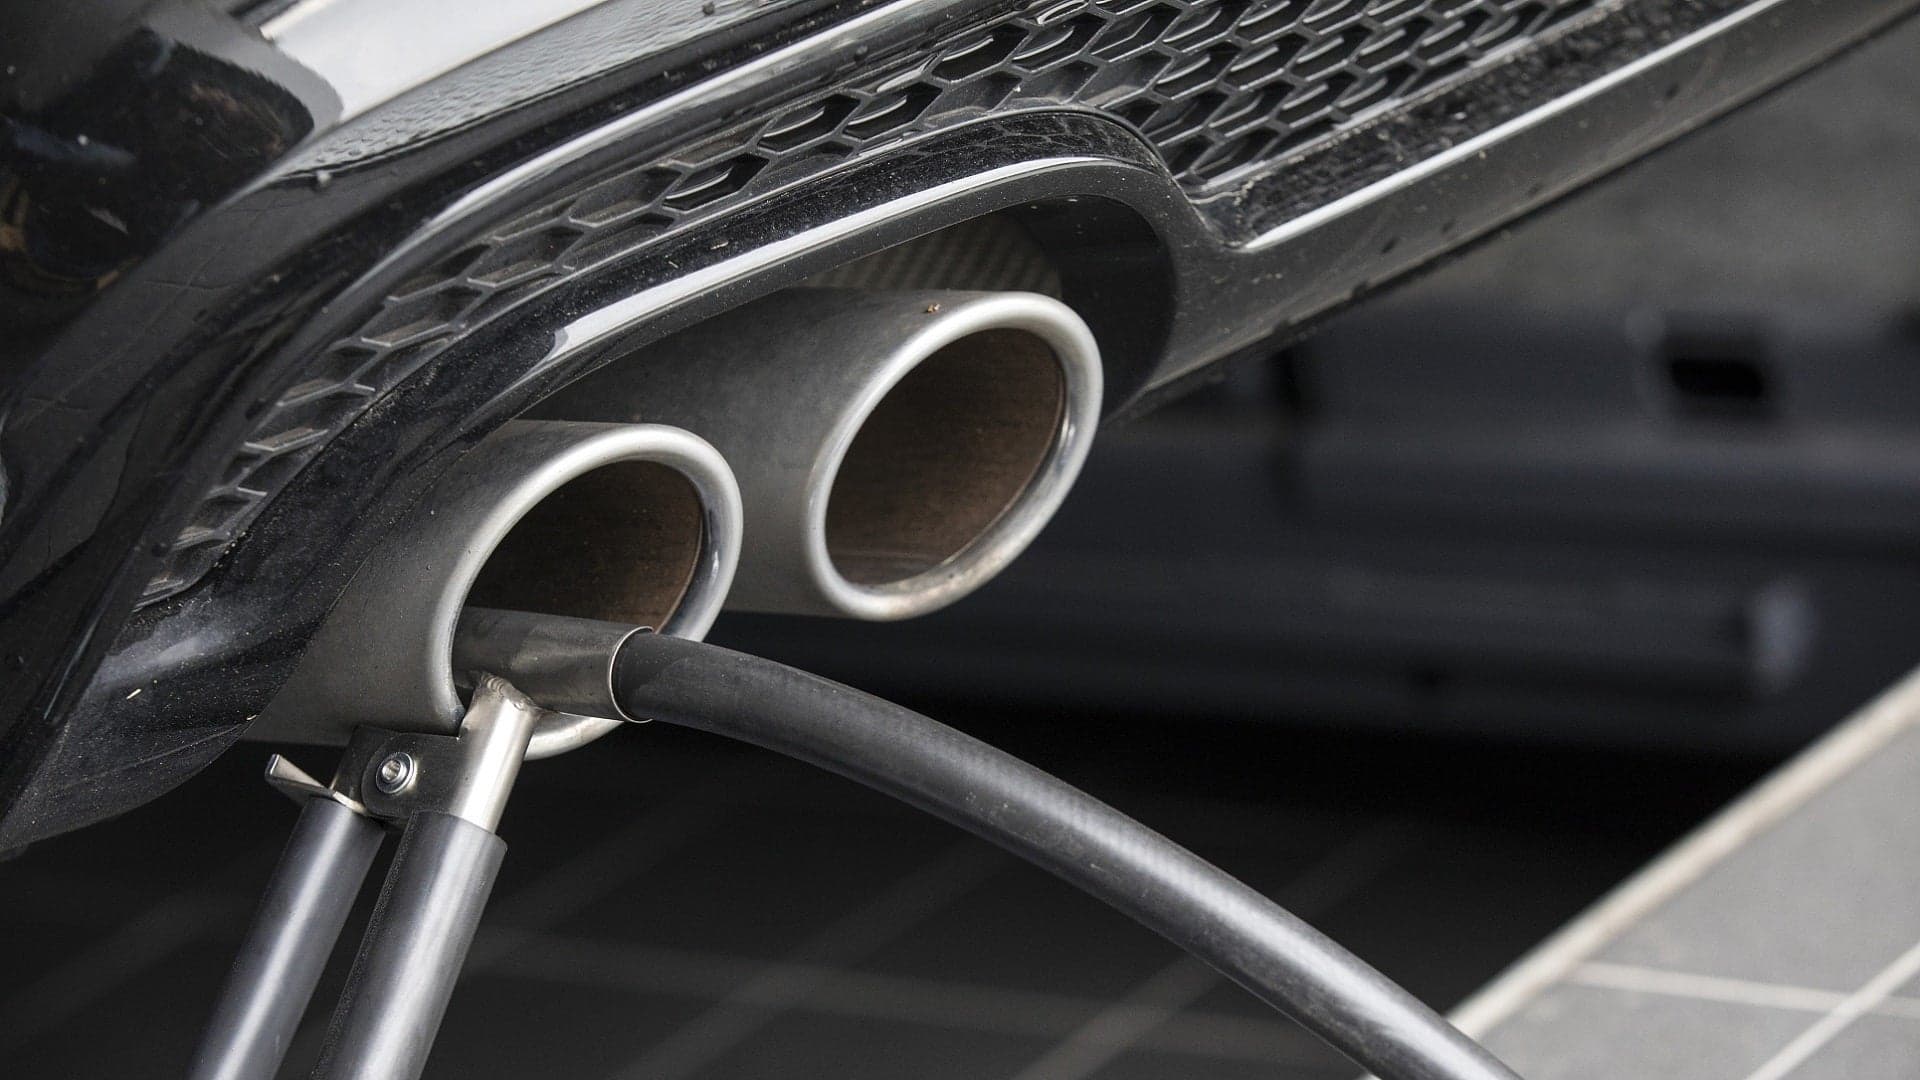 Emissions Testing May No Longer Be Worth It, Study Shows